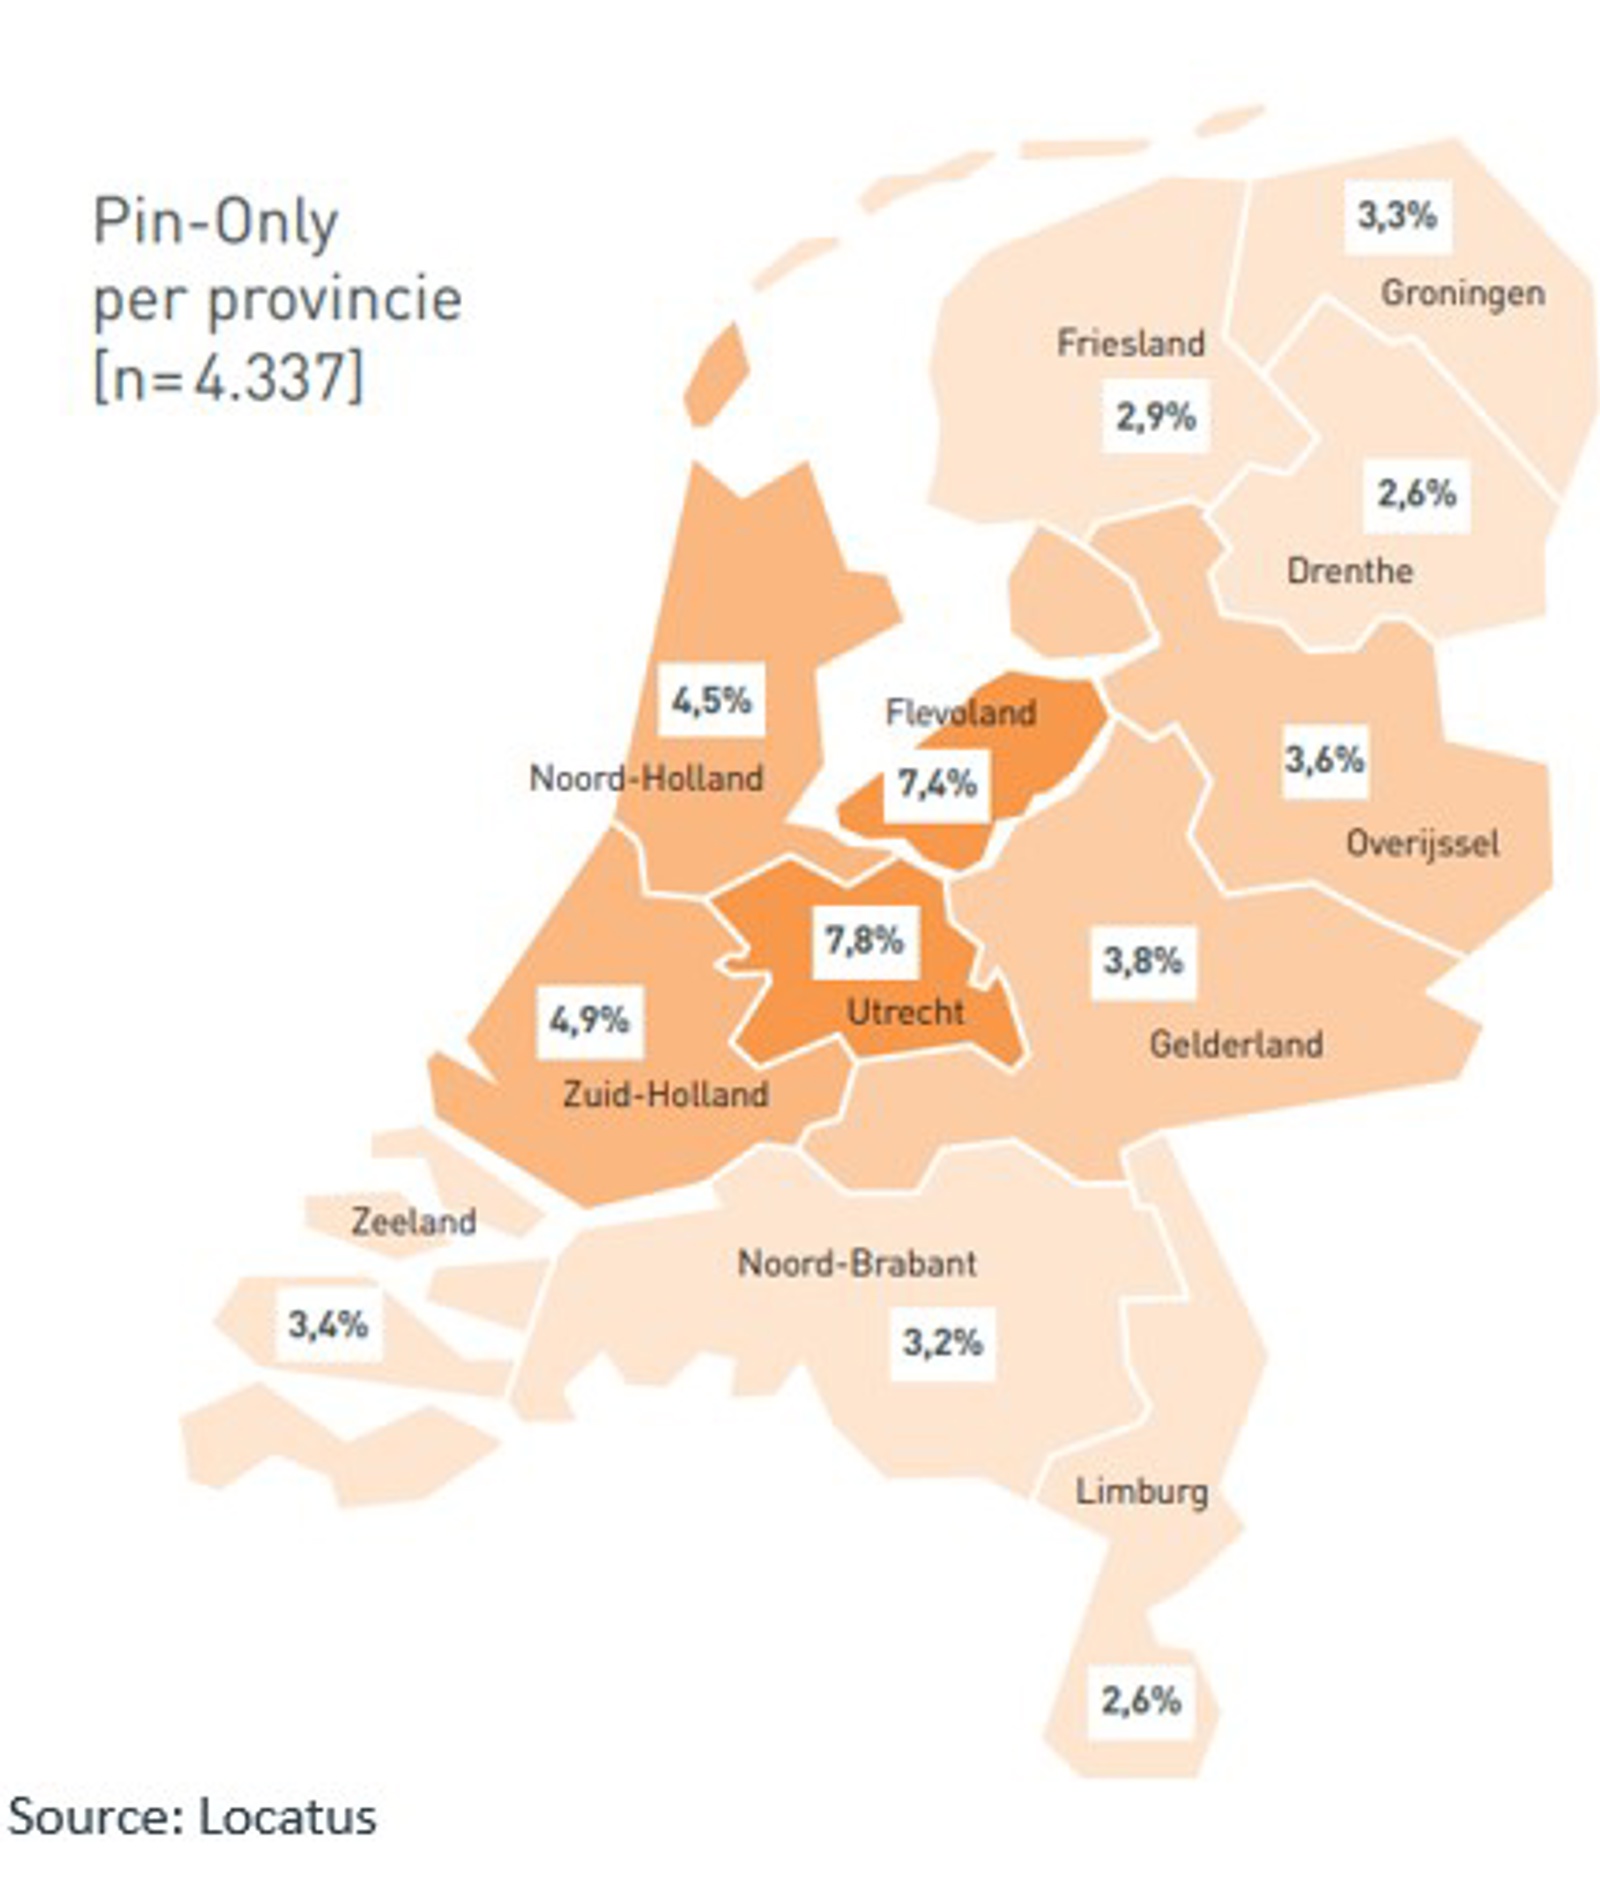 Share of PIN-only shops by province